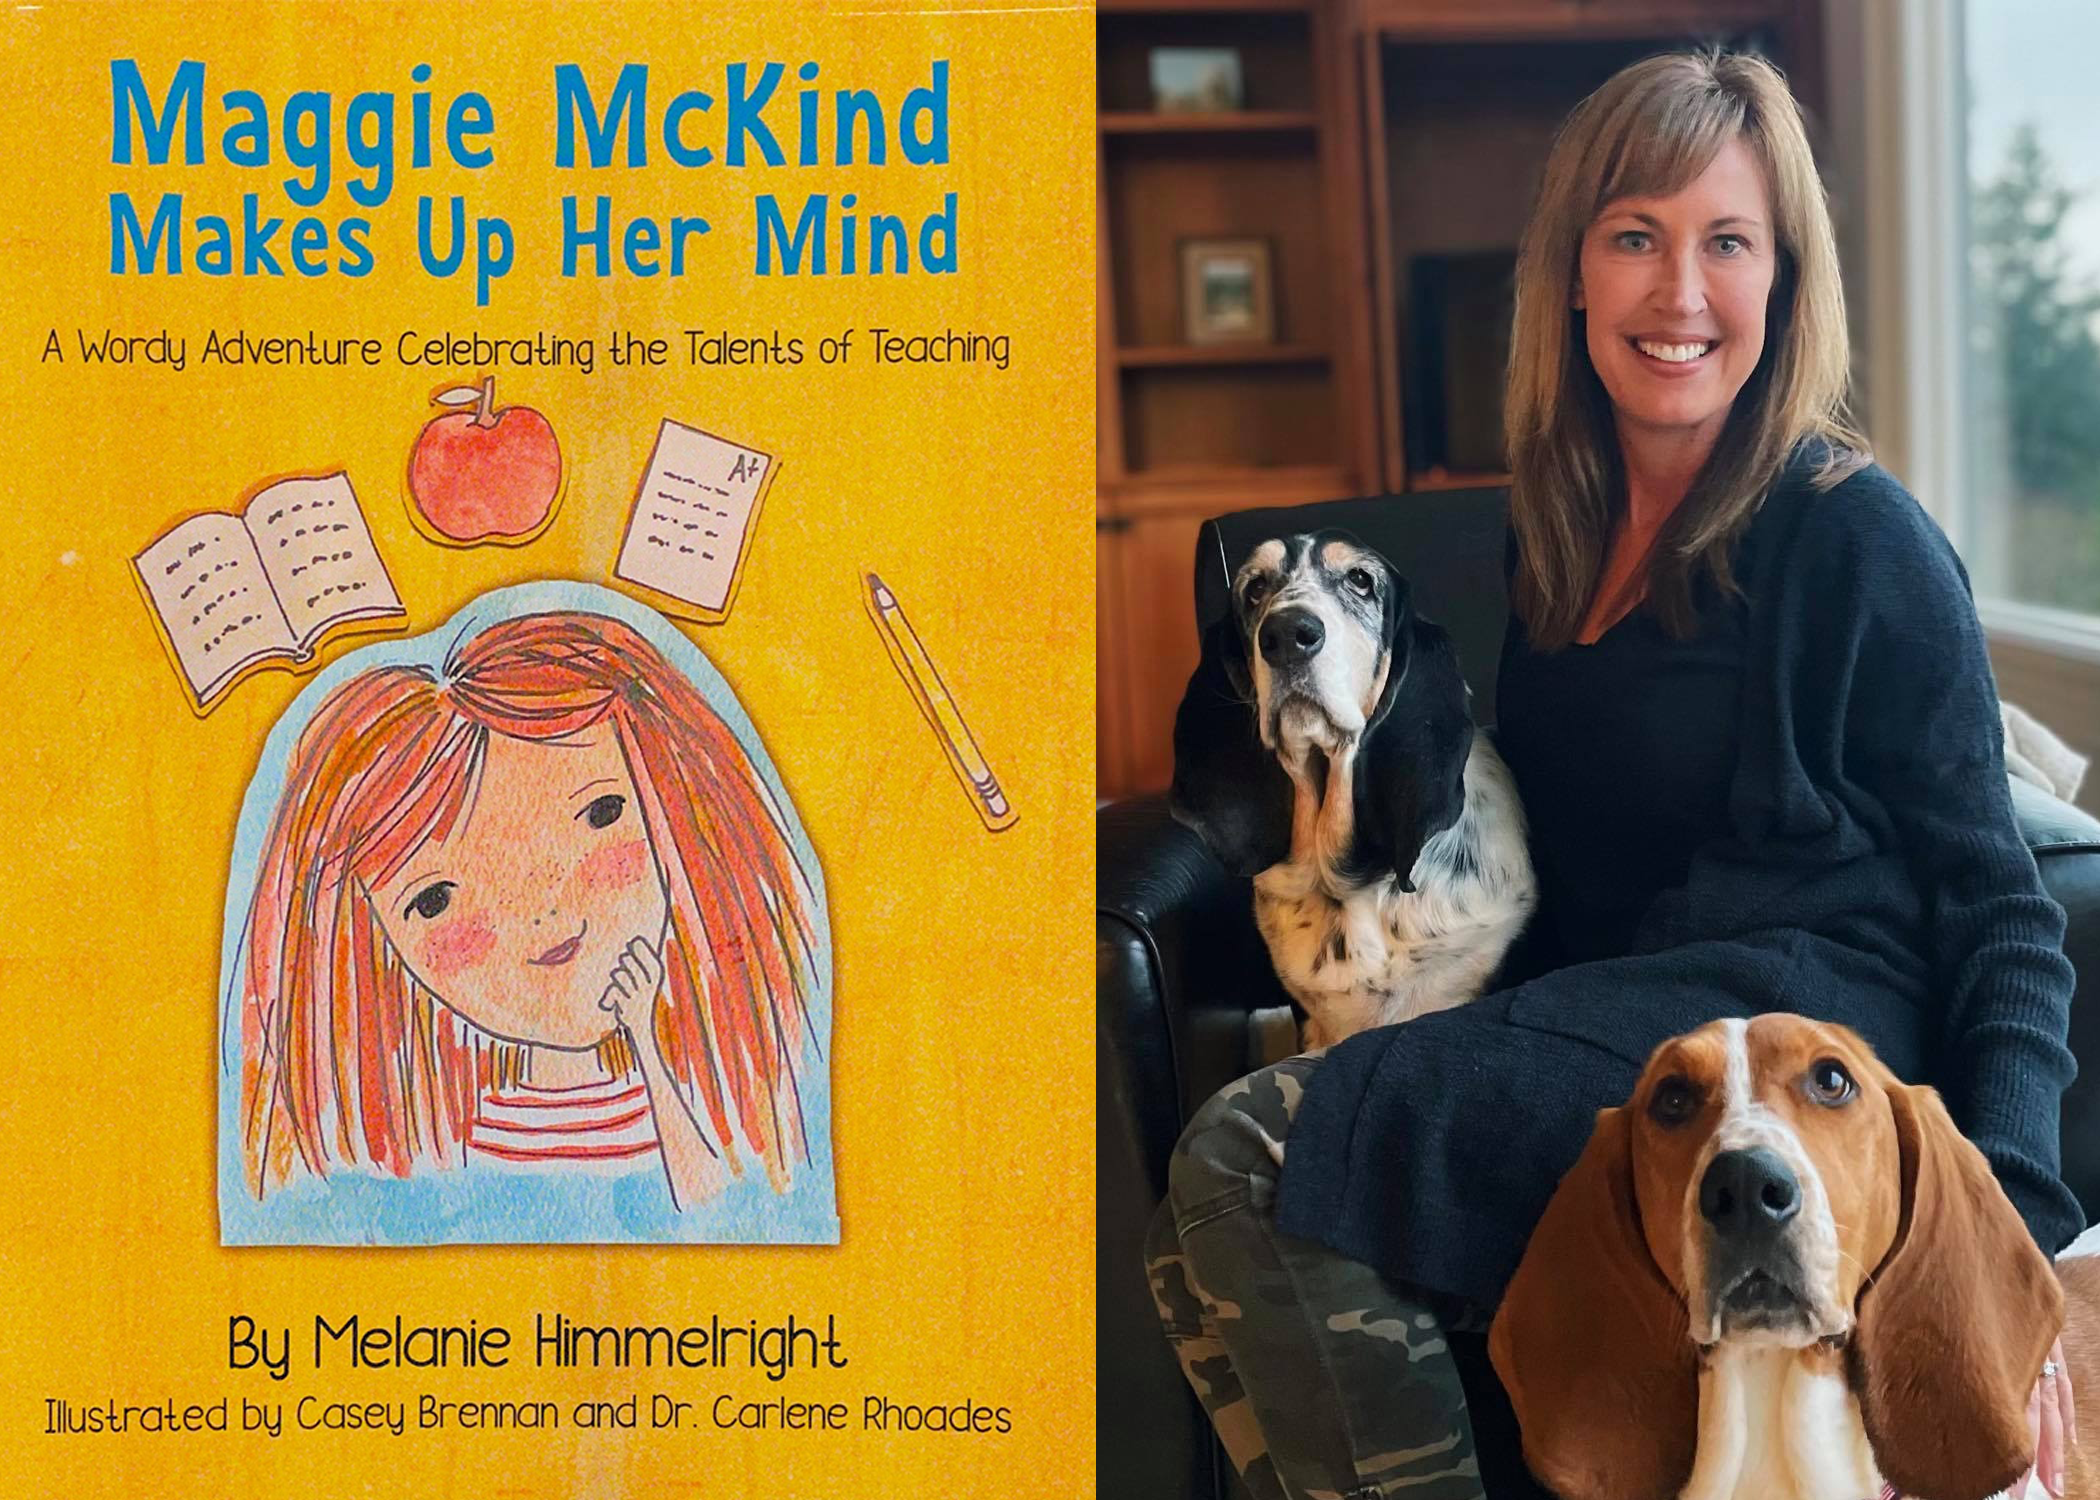 image of Melanie Himmelright and book cover, Maggie McKind Makes Up Her Mind